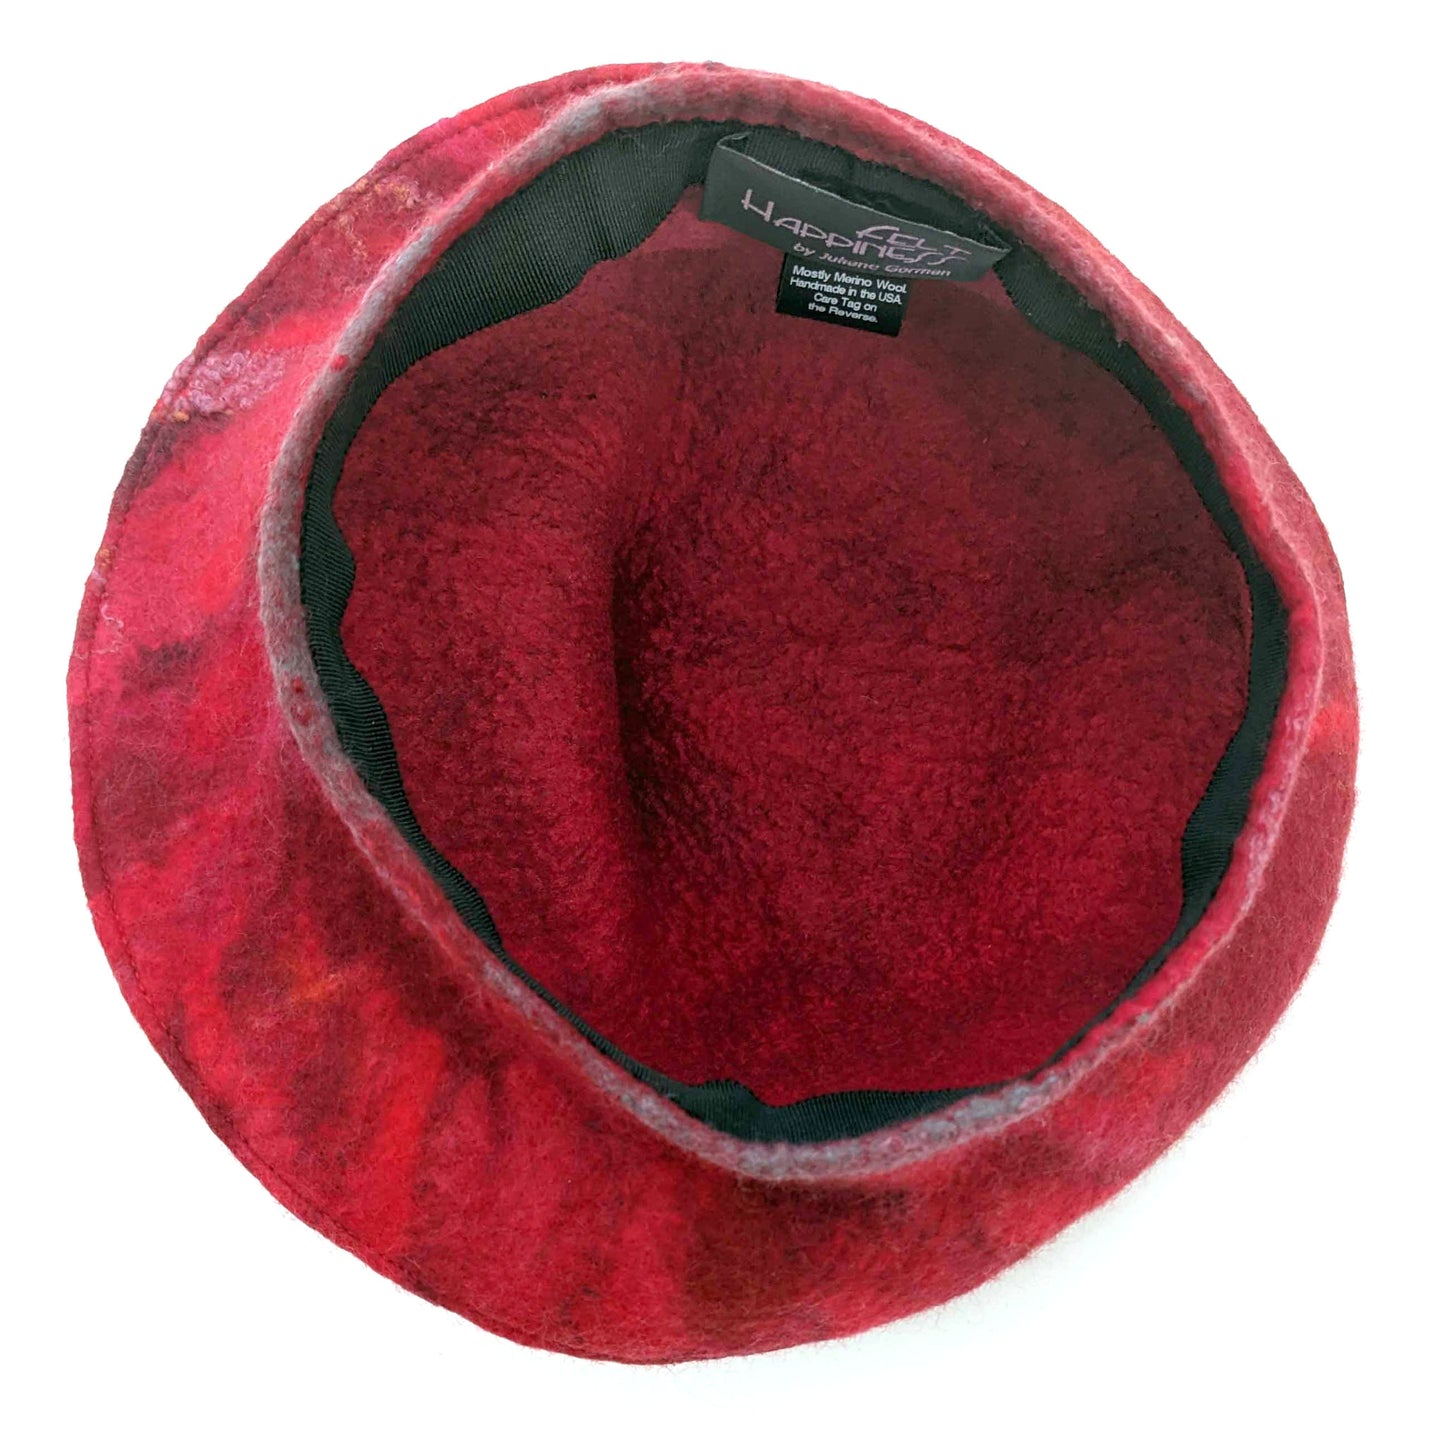 Red Curlicue Beret with Dark Marbling - insideview